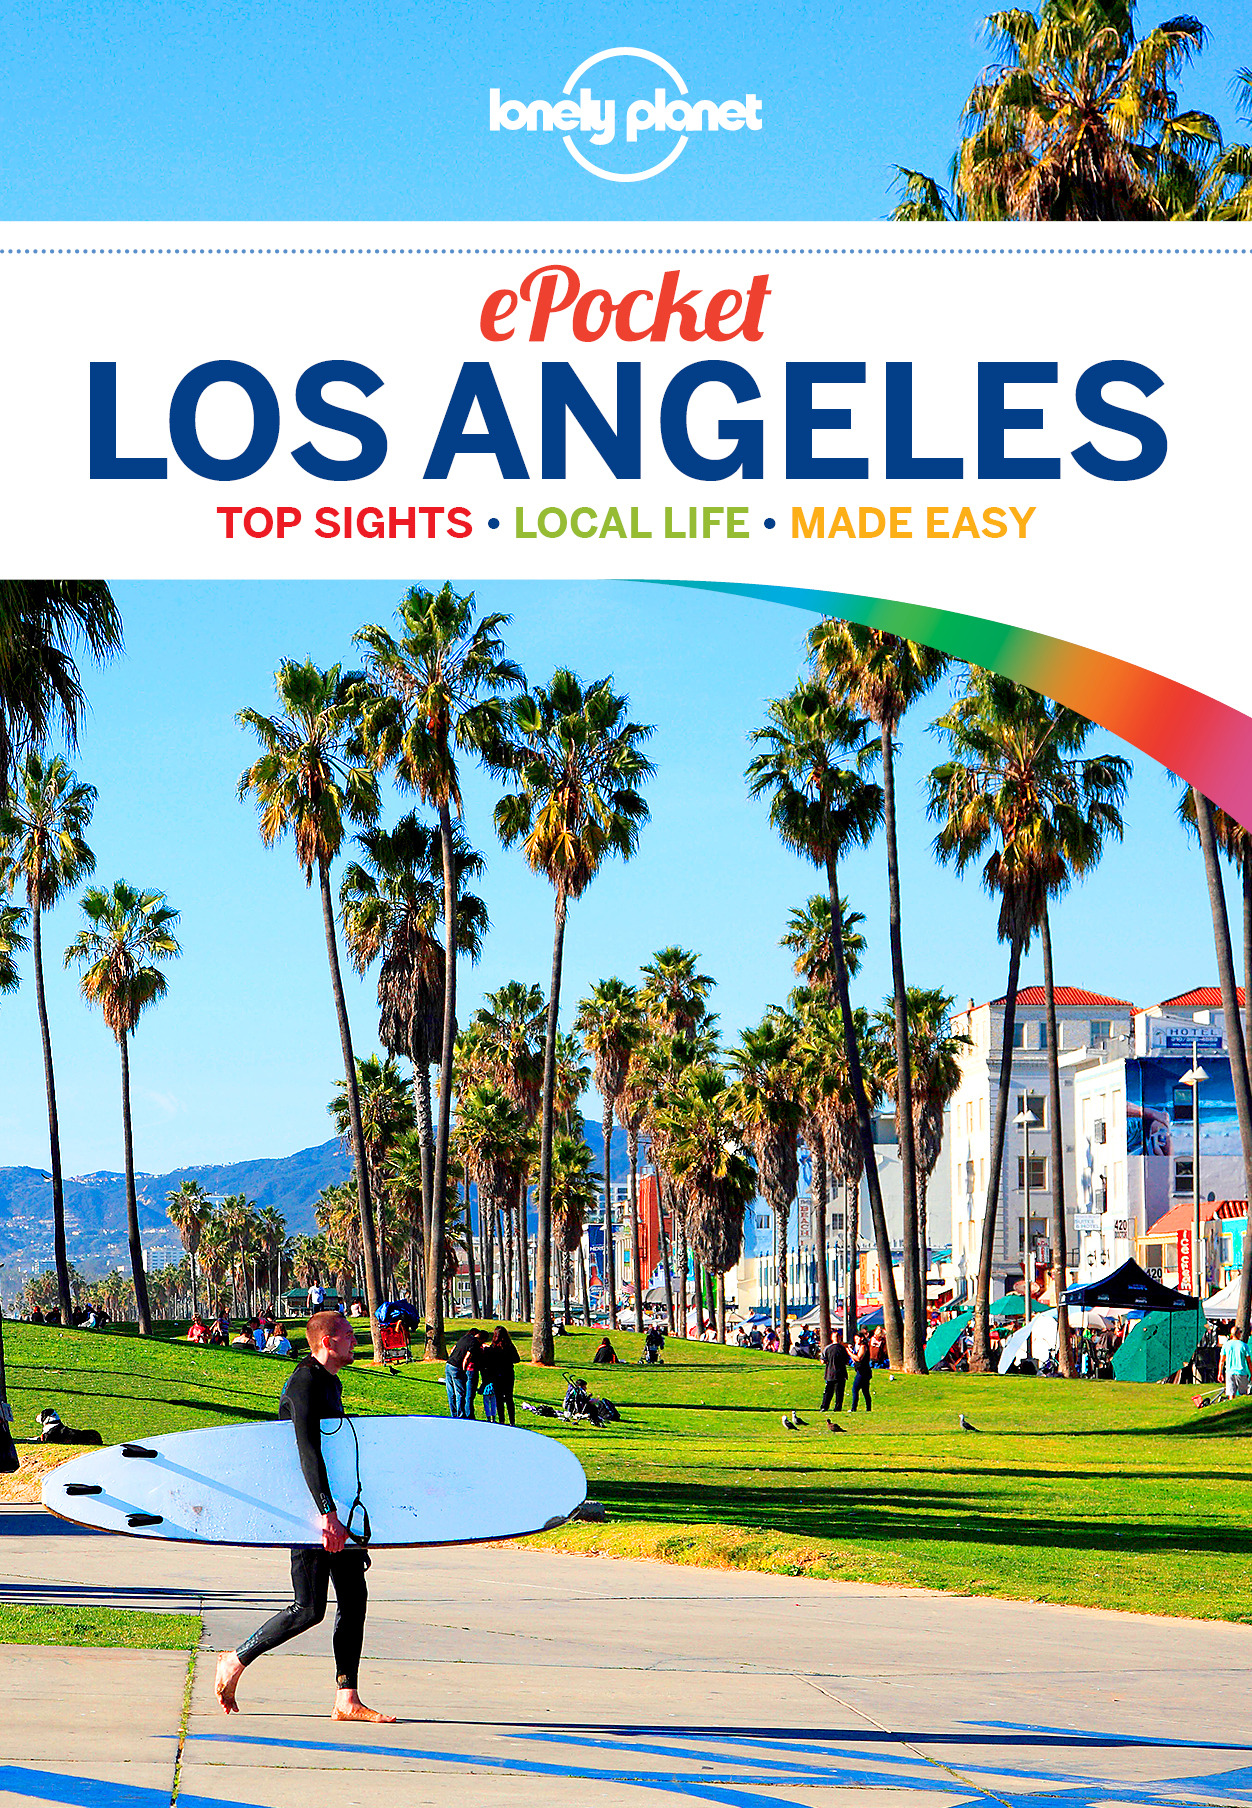 Planet, Lonely - Lonely Planet Pocket Los Angeles, e-kirja